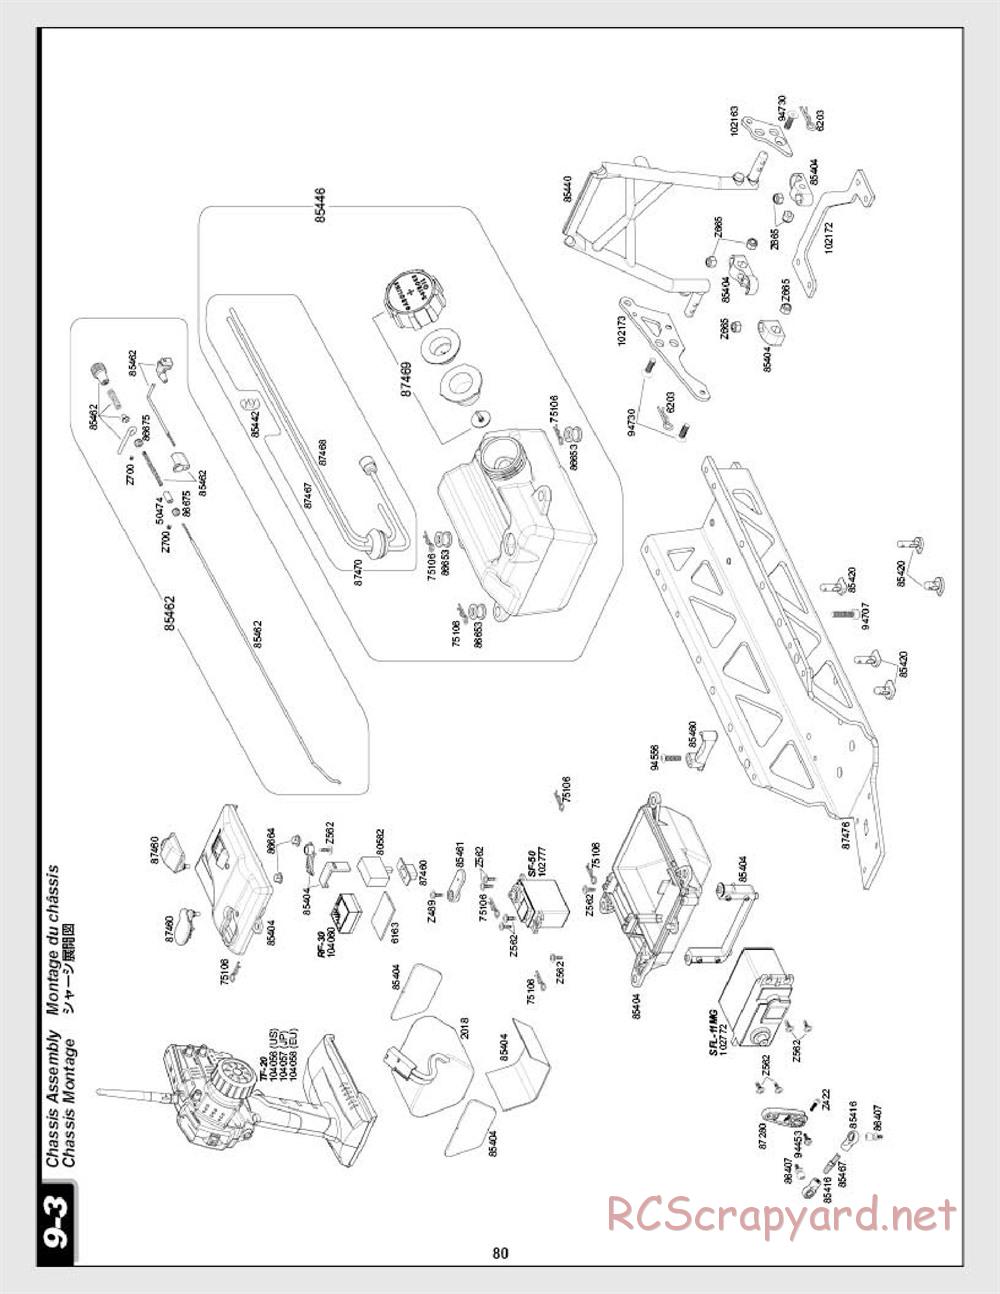 HPI - Baja 5SC - Exploded View - Page 80